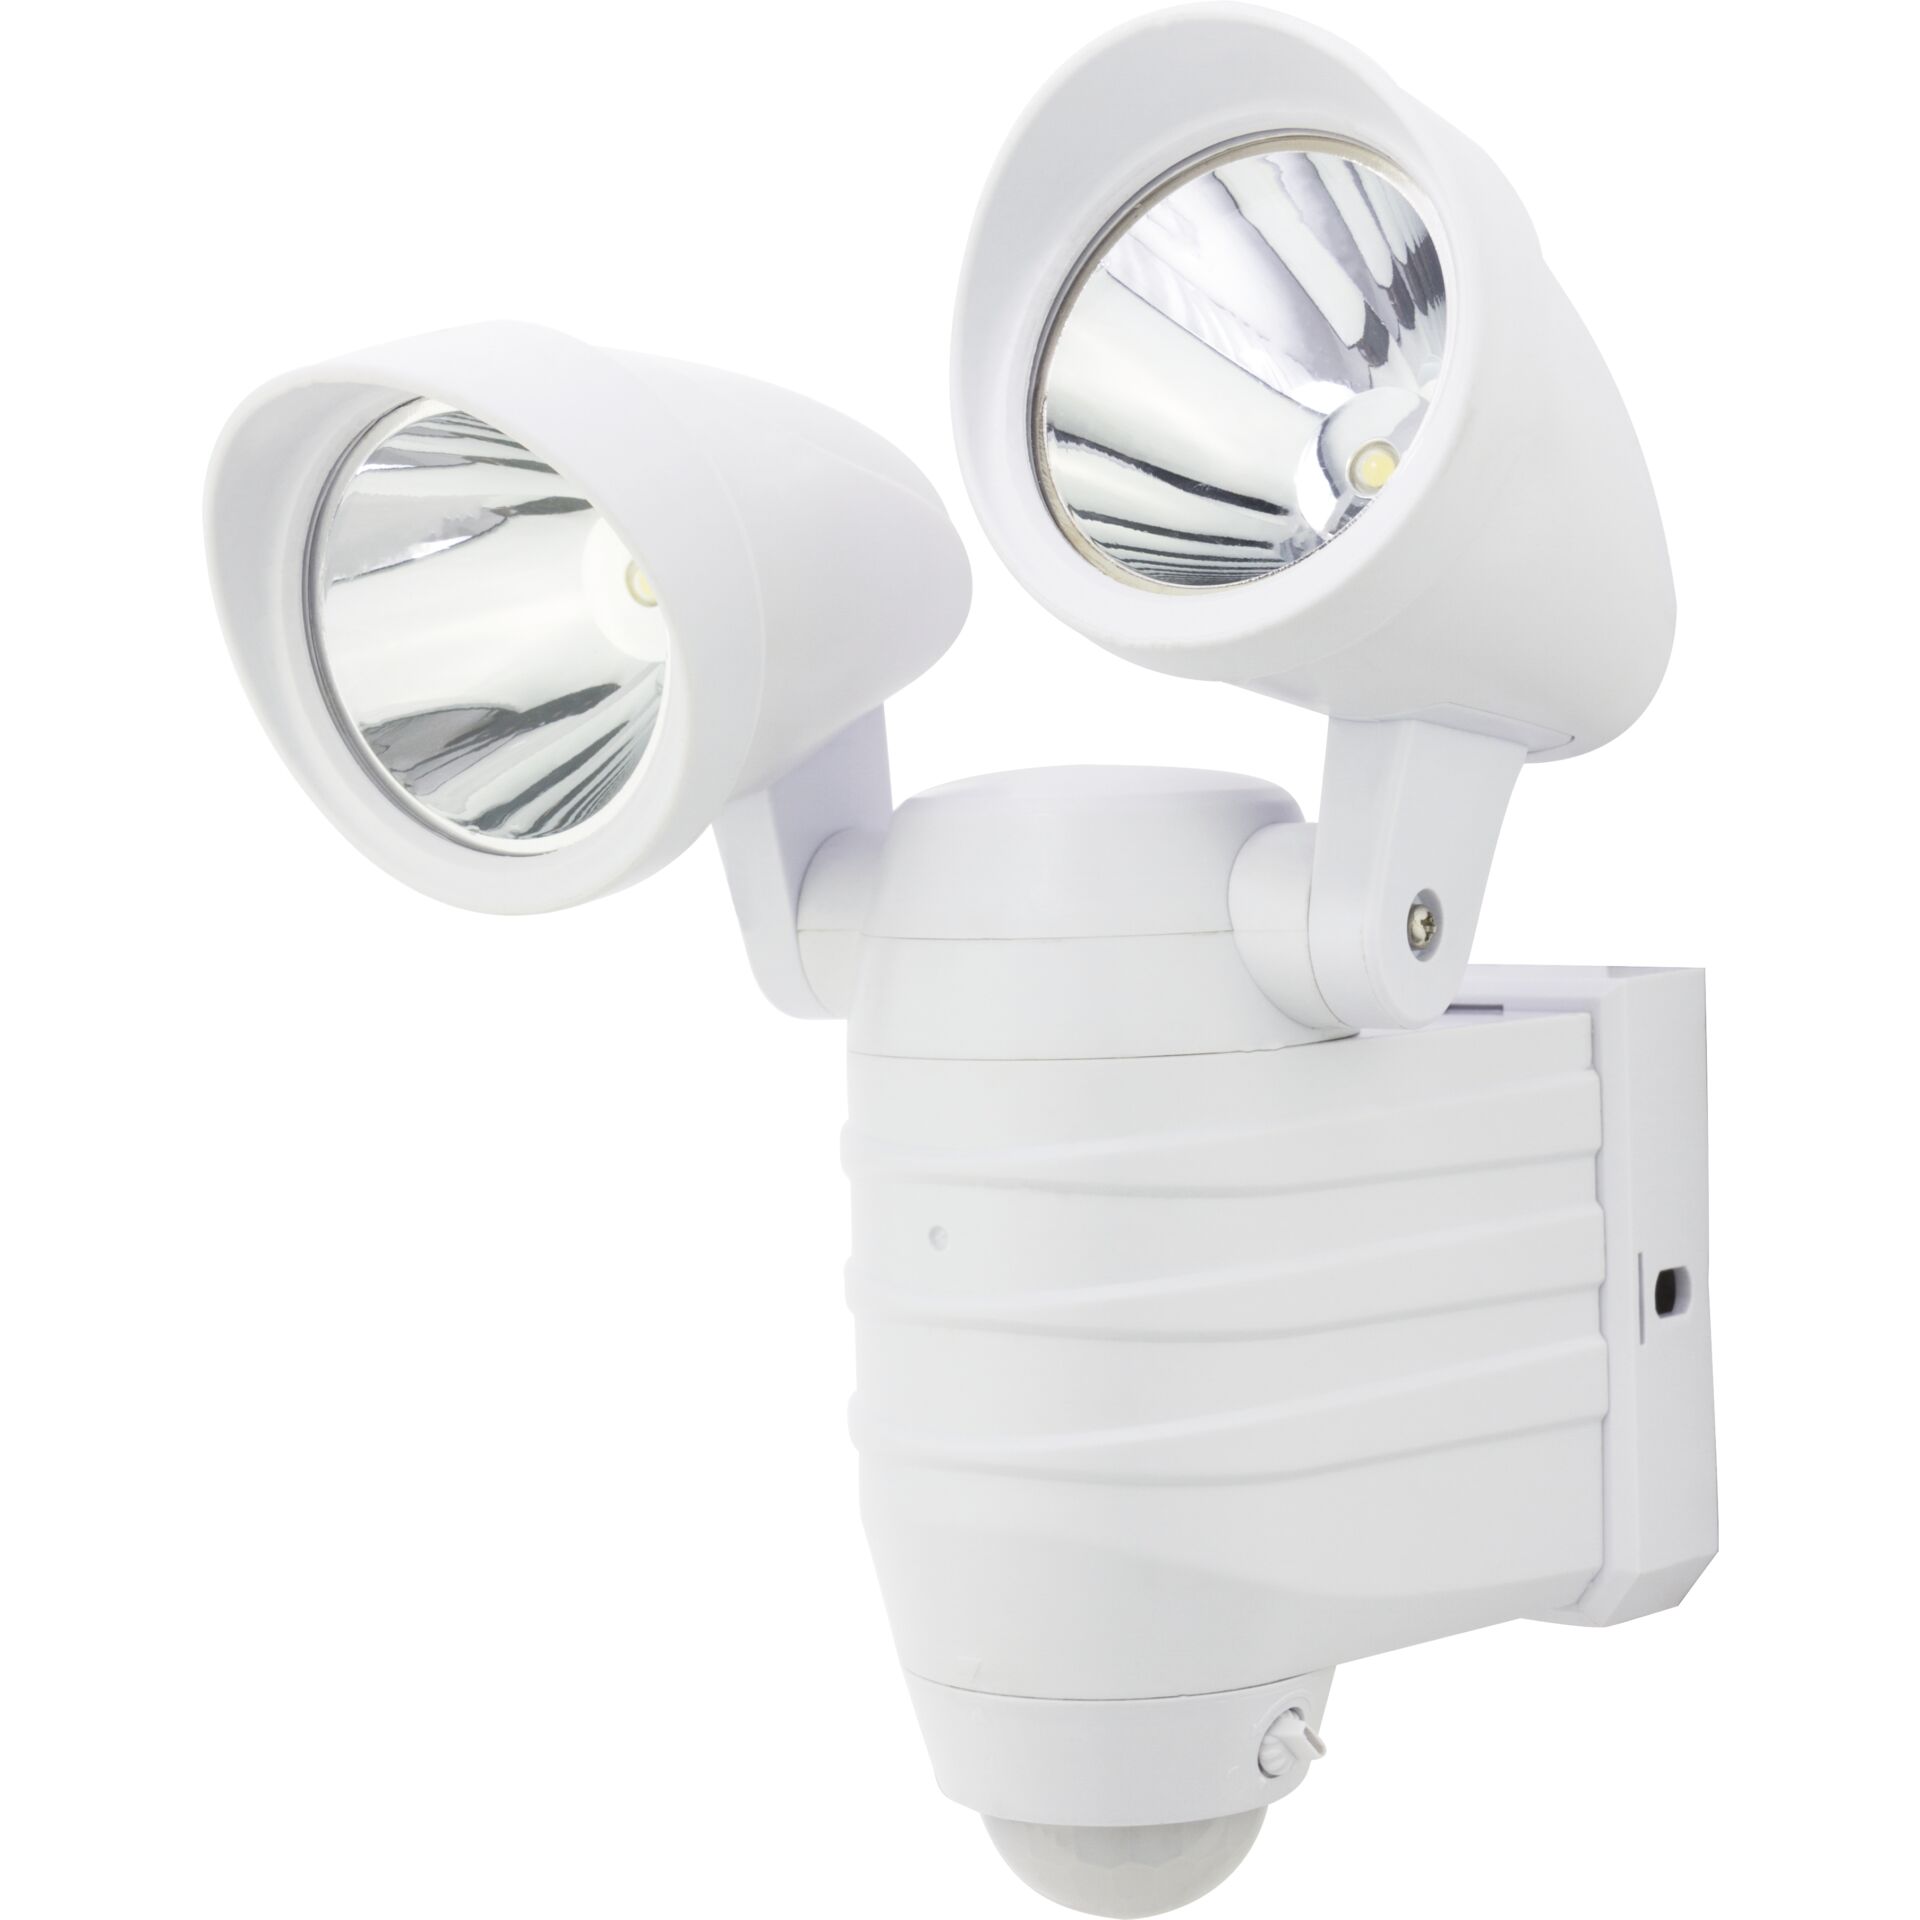 REV LED Double Spotlight with Motion Detector+ Wall bracket